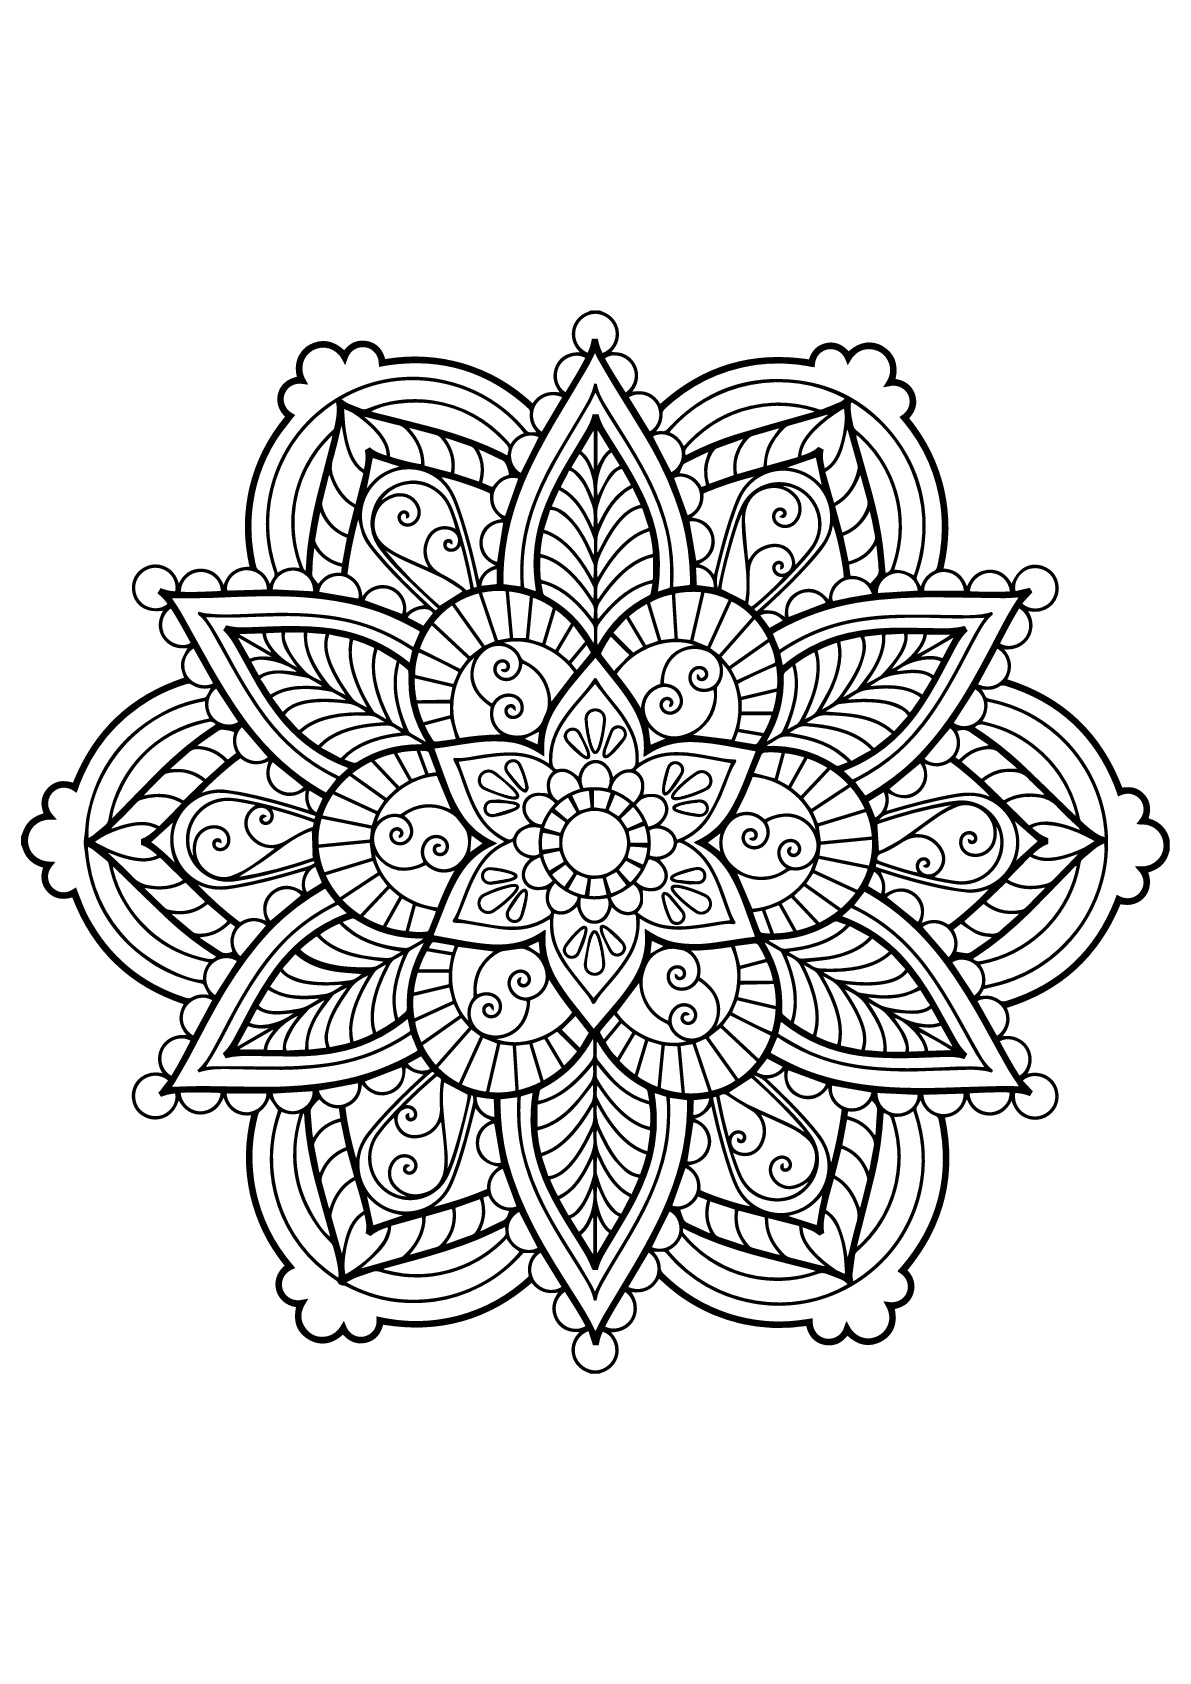 Mandala from Free Coloring book for adults